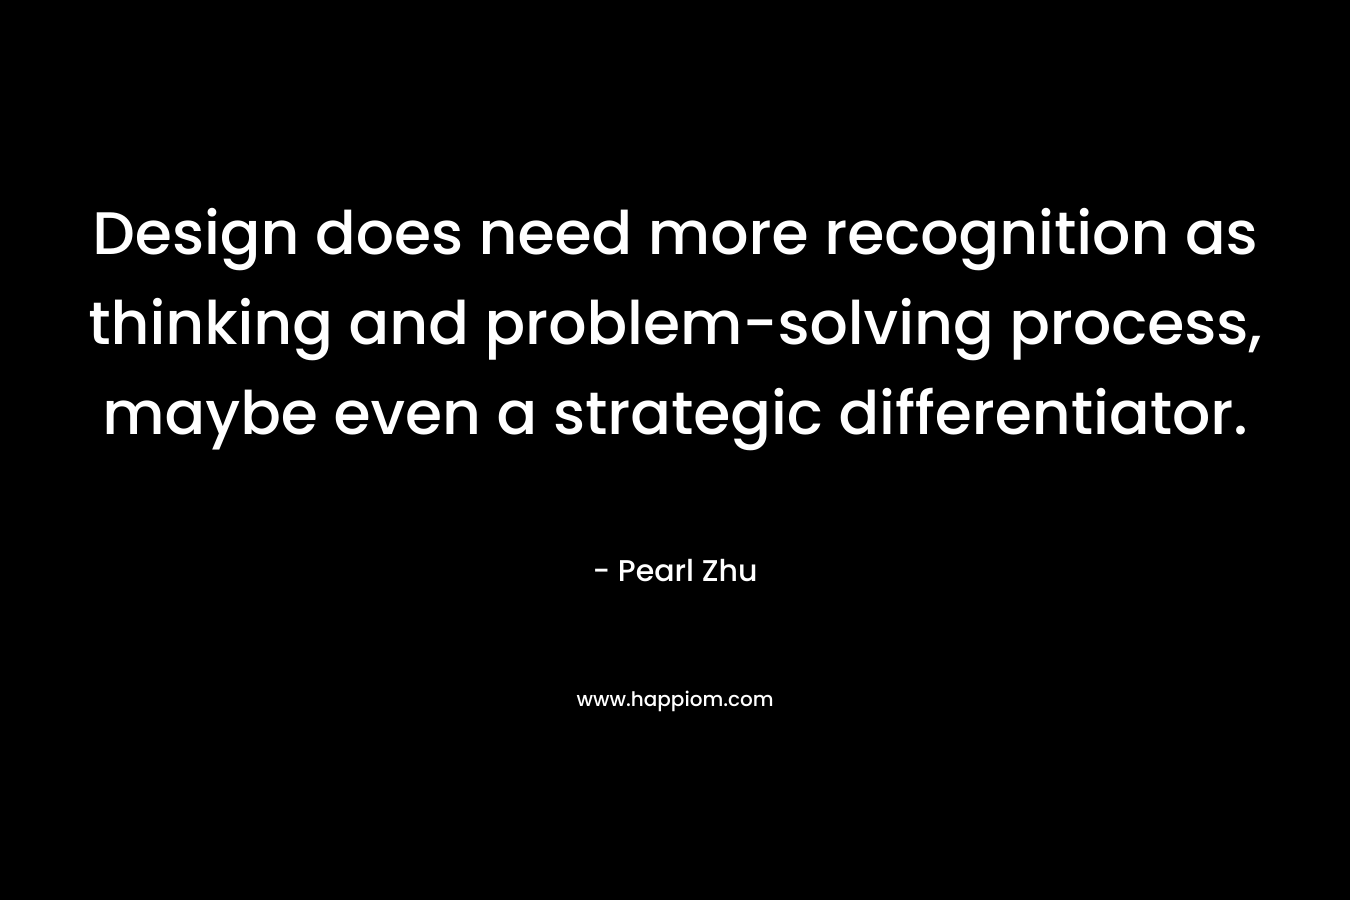 Design does need more recognition as thinking and problem-solving process, maybe even a strategic differentiator. – Pearl Zhu